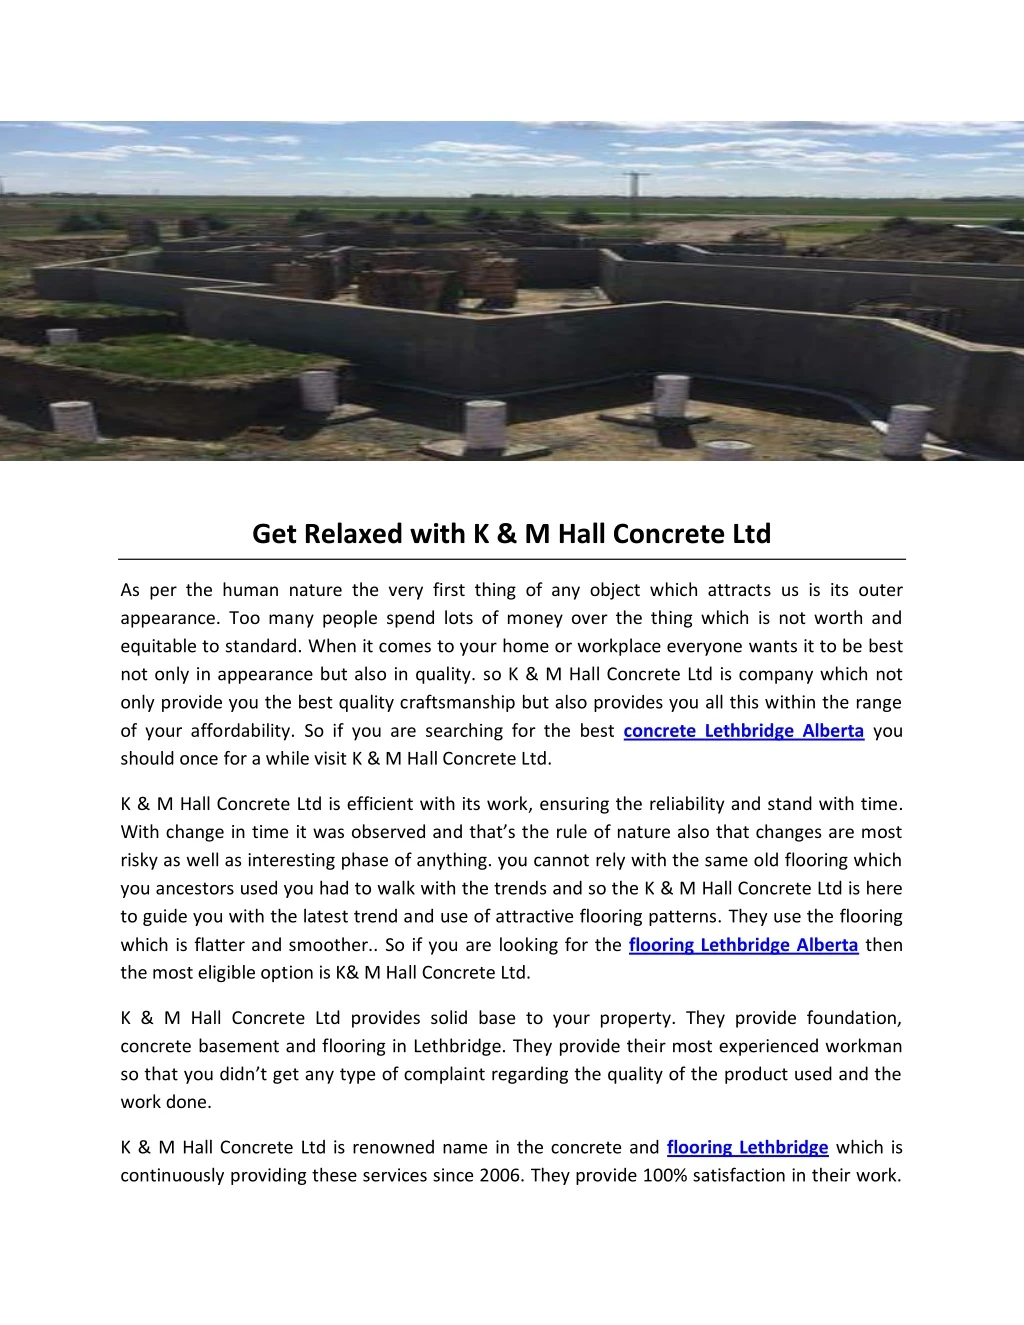 get relaxed with k m hall concrete ltd